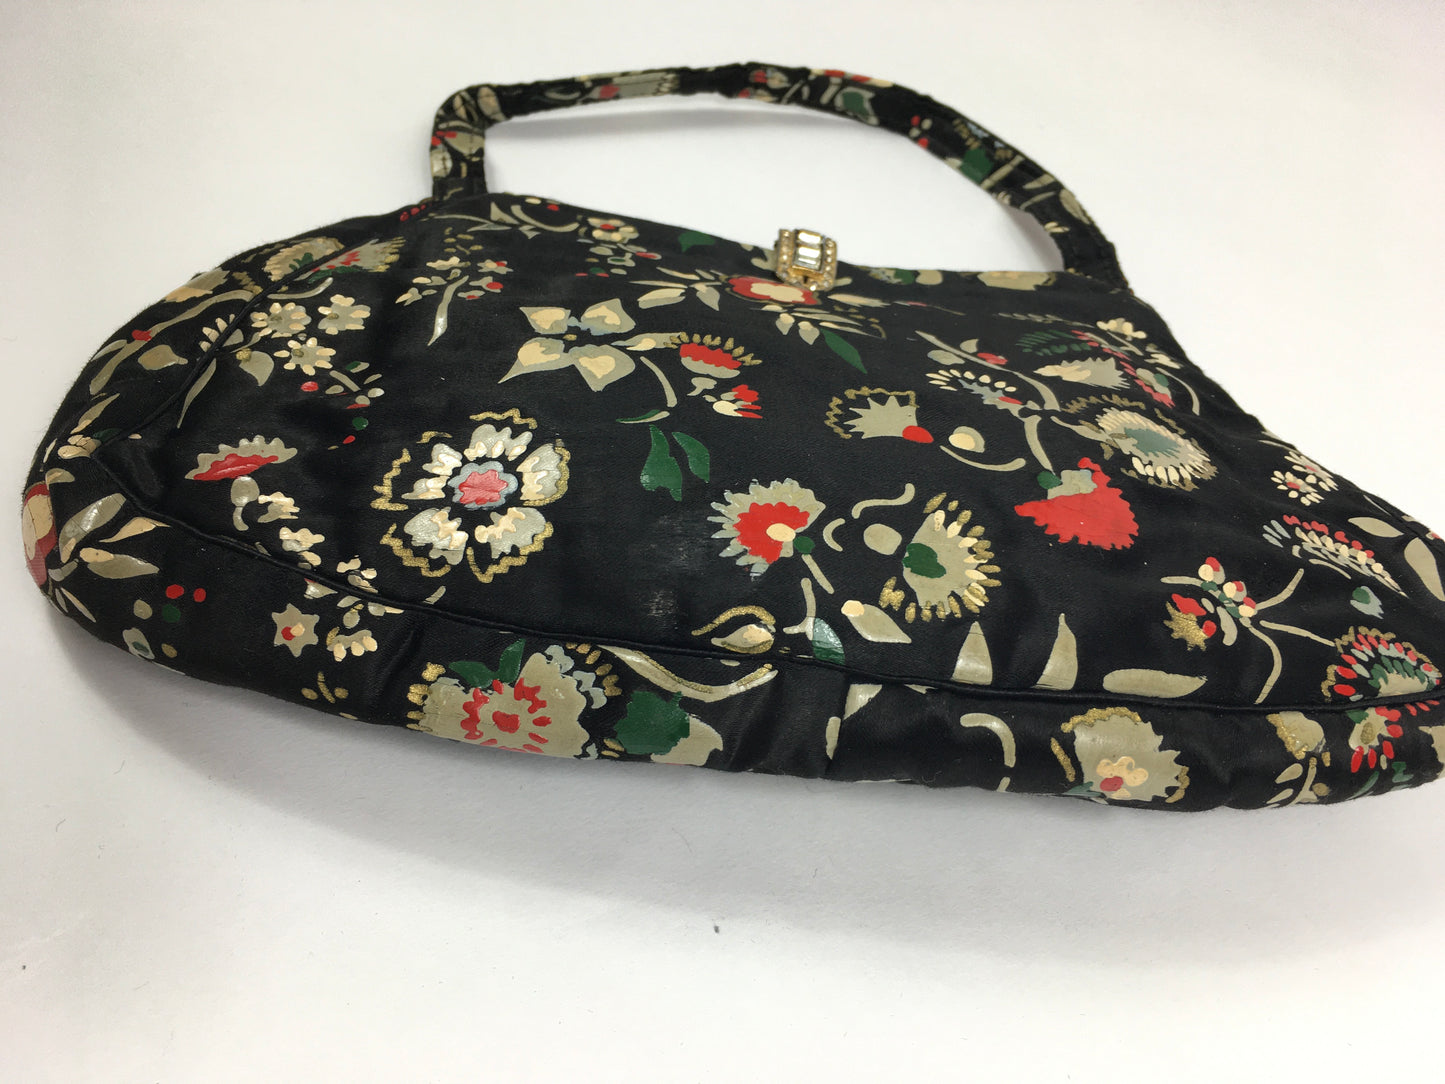 Original 1930’s Exquisite  Evening Bag - In The Most Beautiful Handpainted Delicate Floral